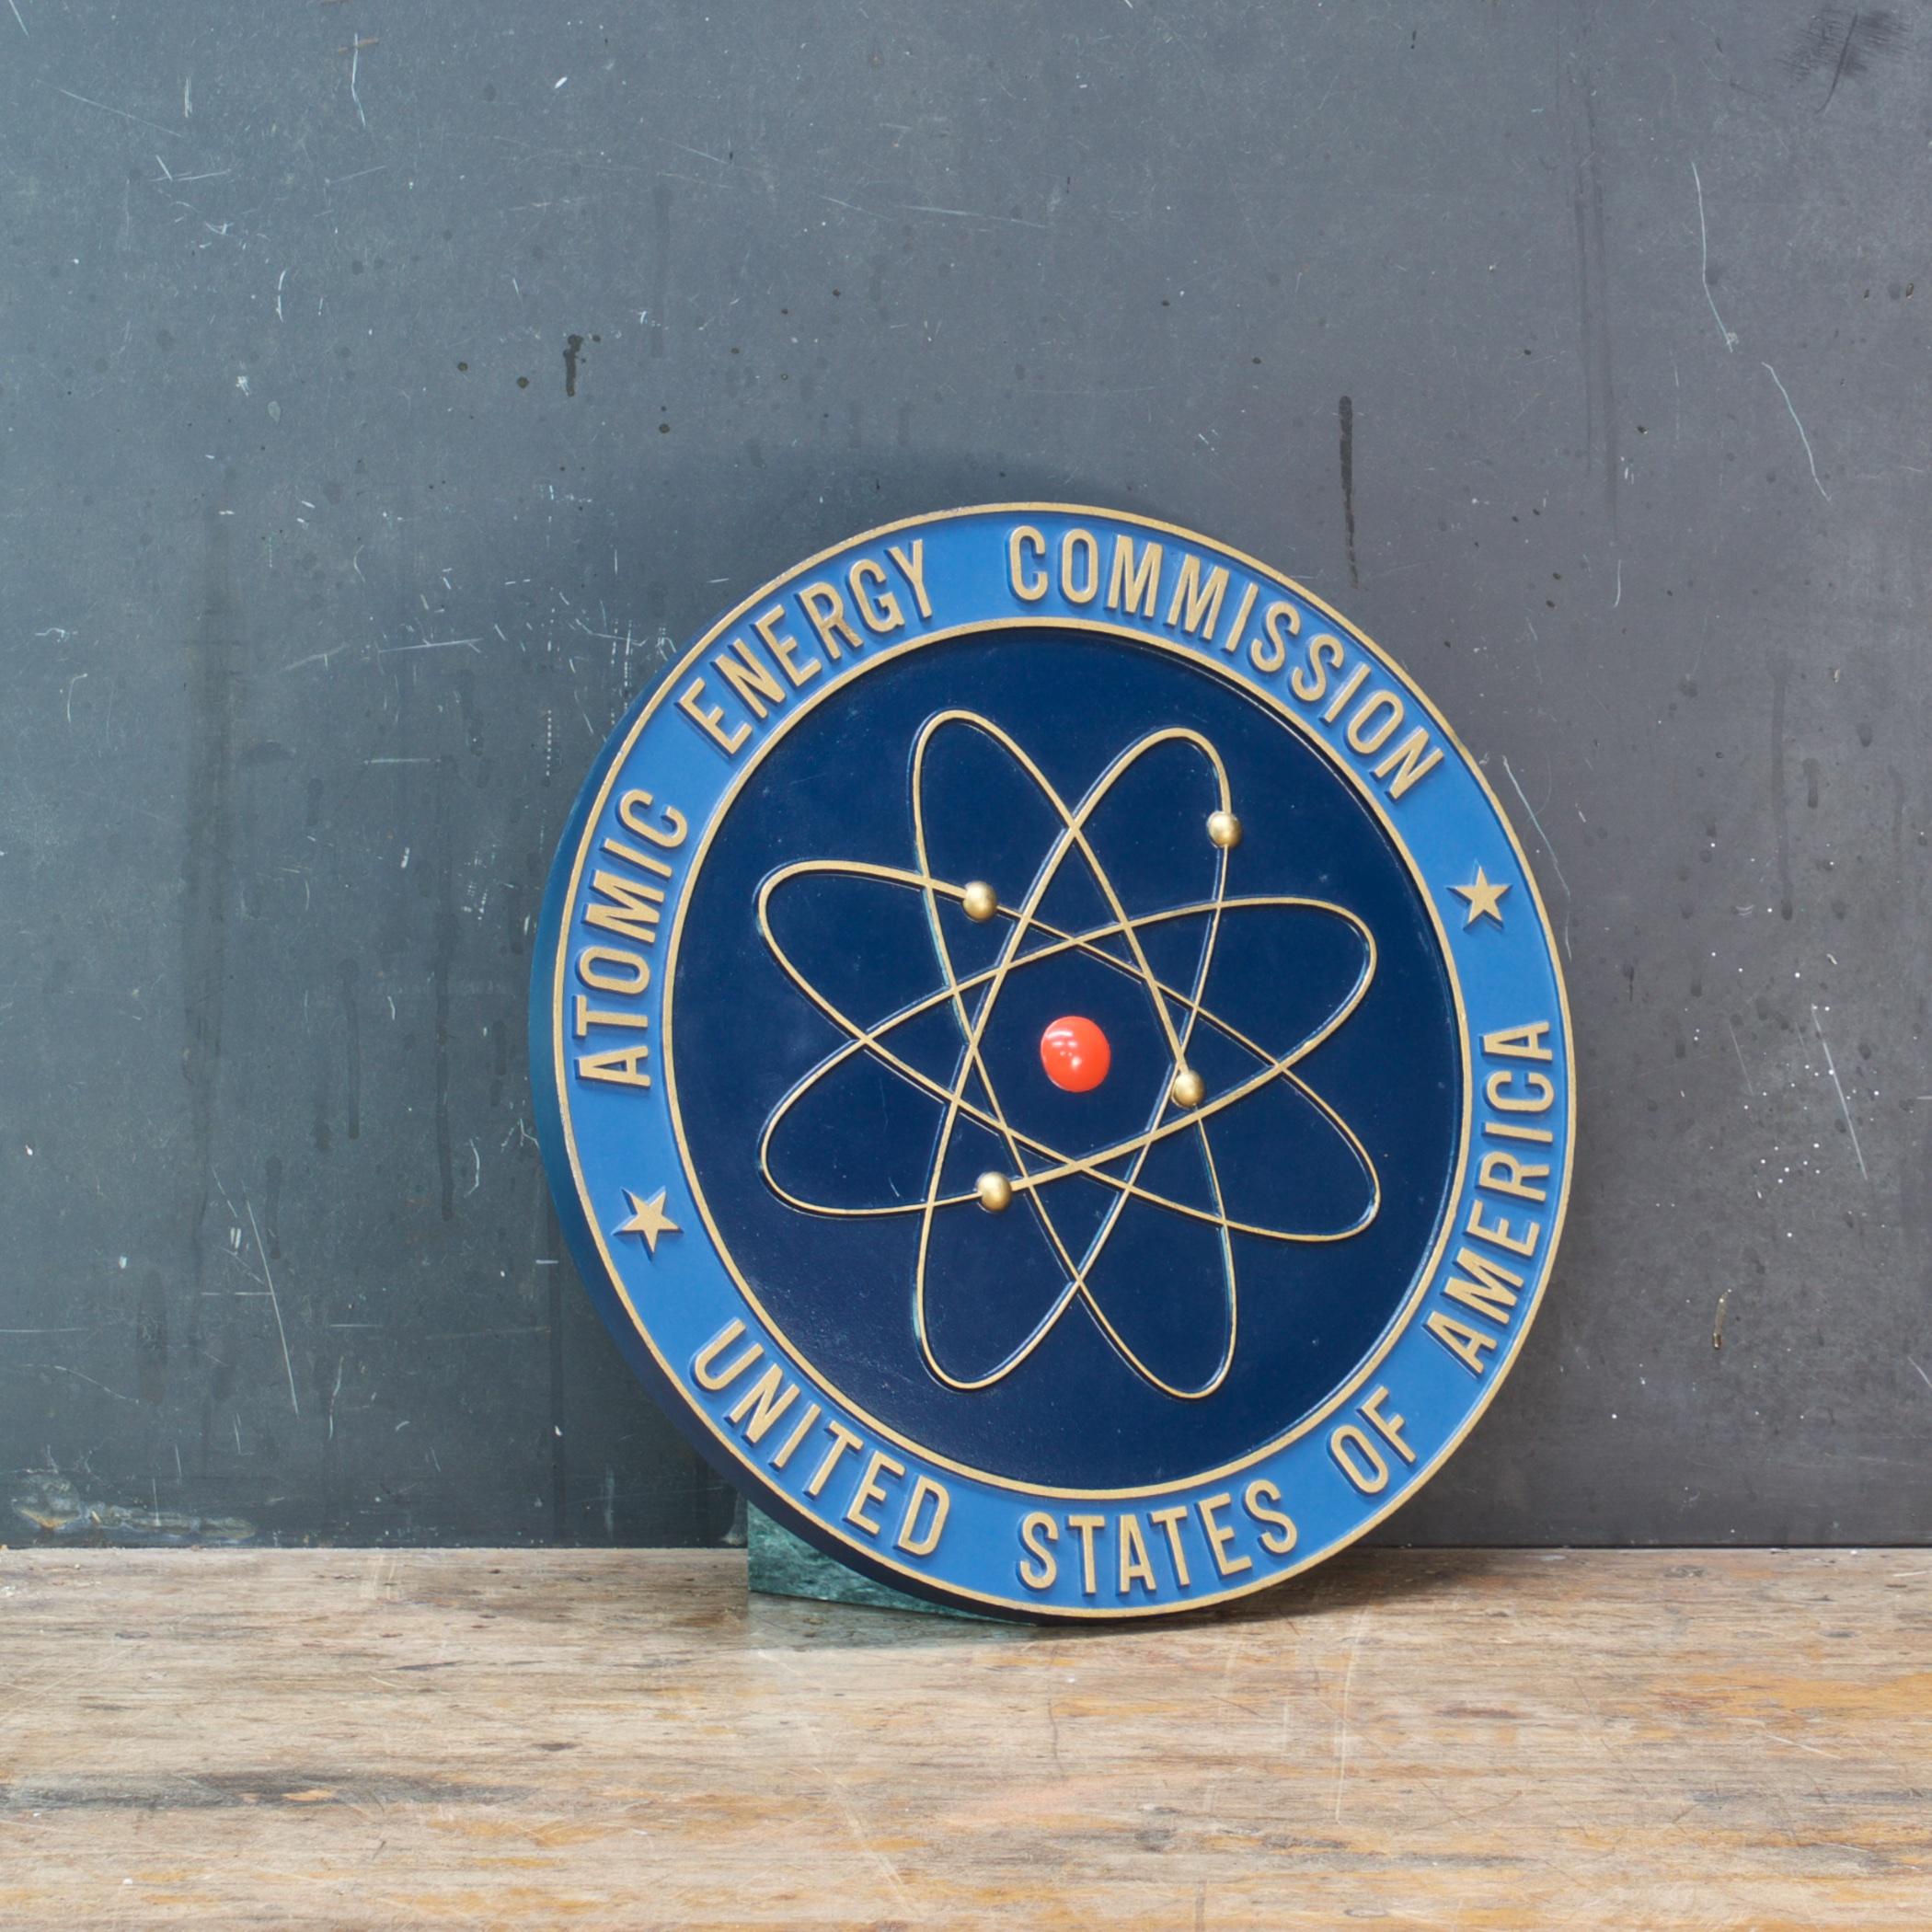 The AEC seal is one of those great totems of the atomic age. A largely symmetrical and stylized representation of an atom (the highly toxic beryllium), it is strikingly more straightforward than the seals of its successor organizations. The design